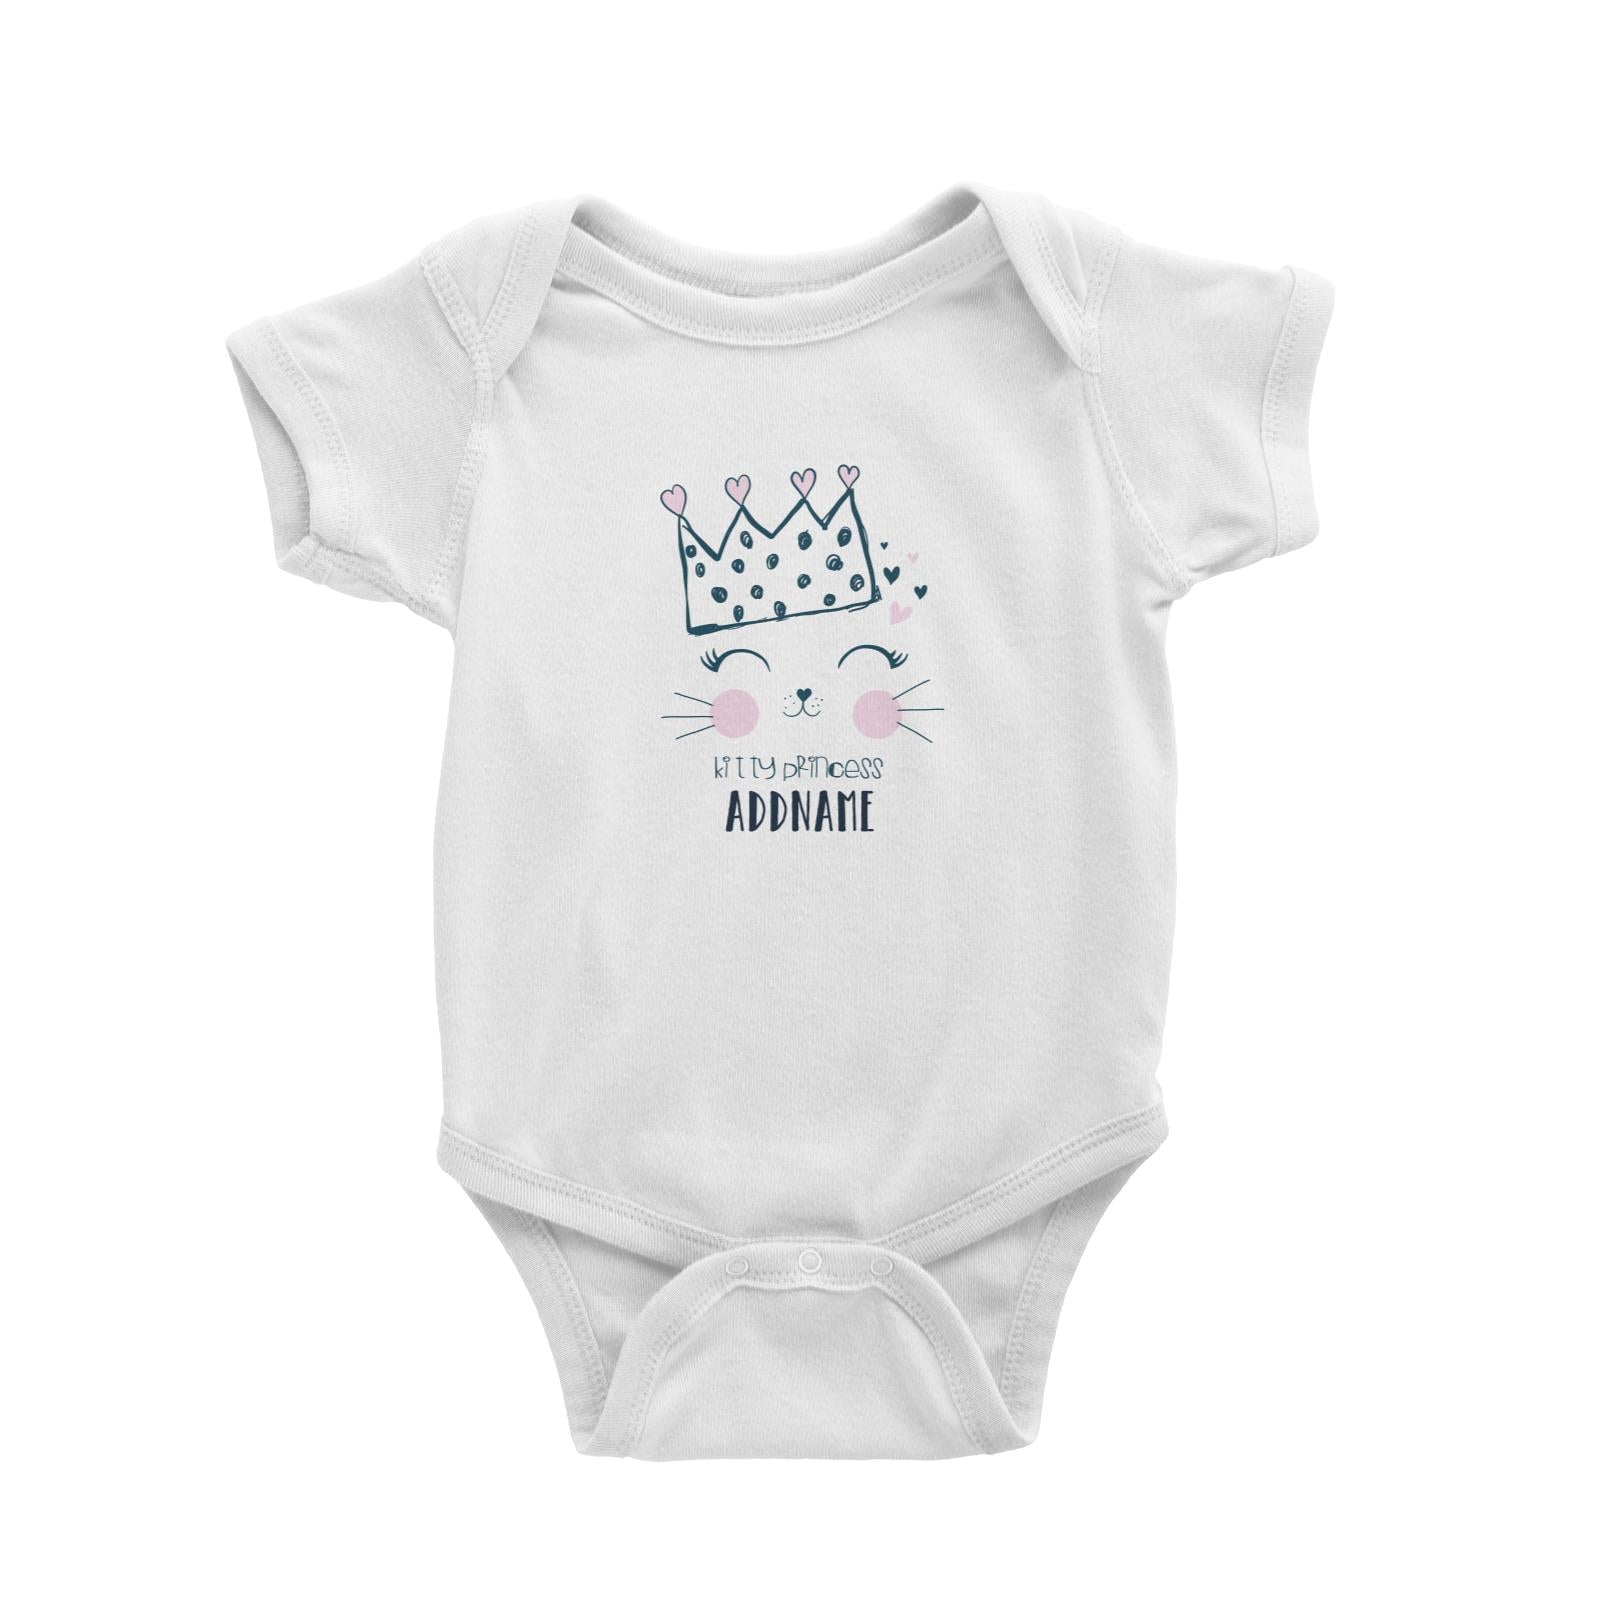 Cool Vibrant Series Kitty Princess Addname Baby Romper